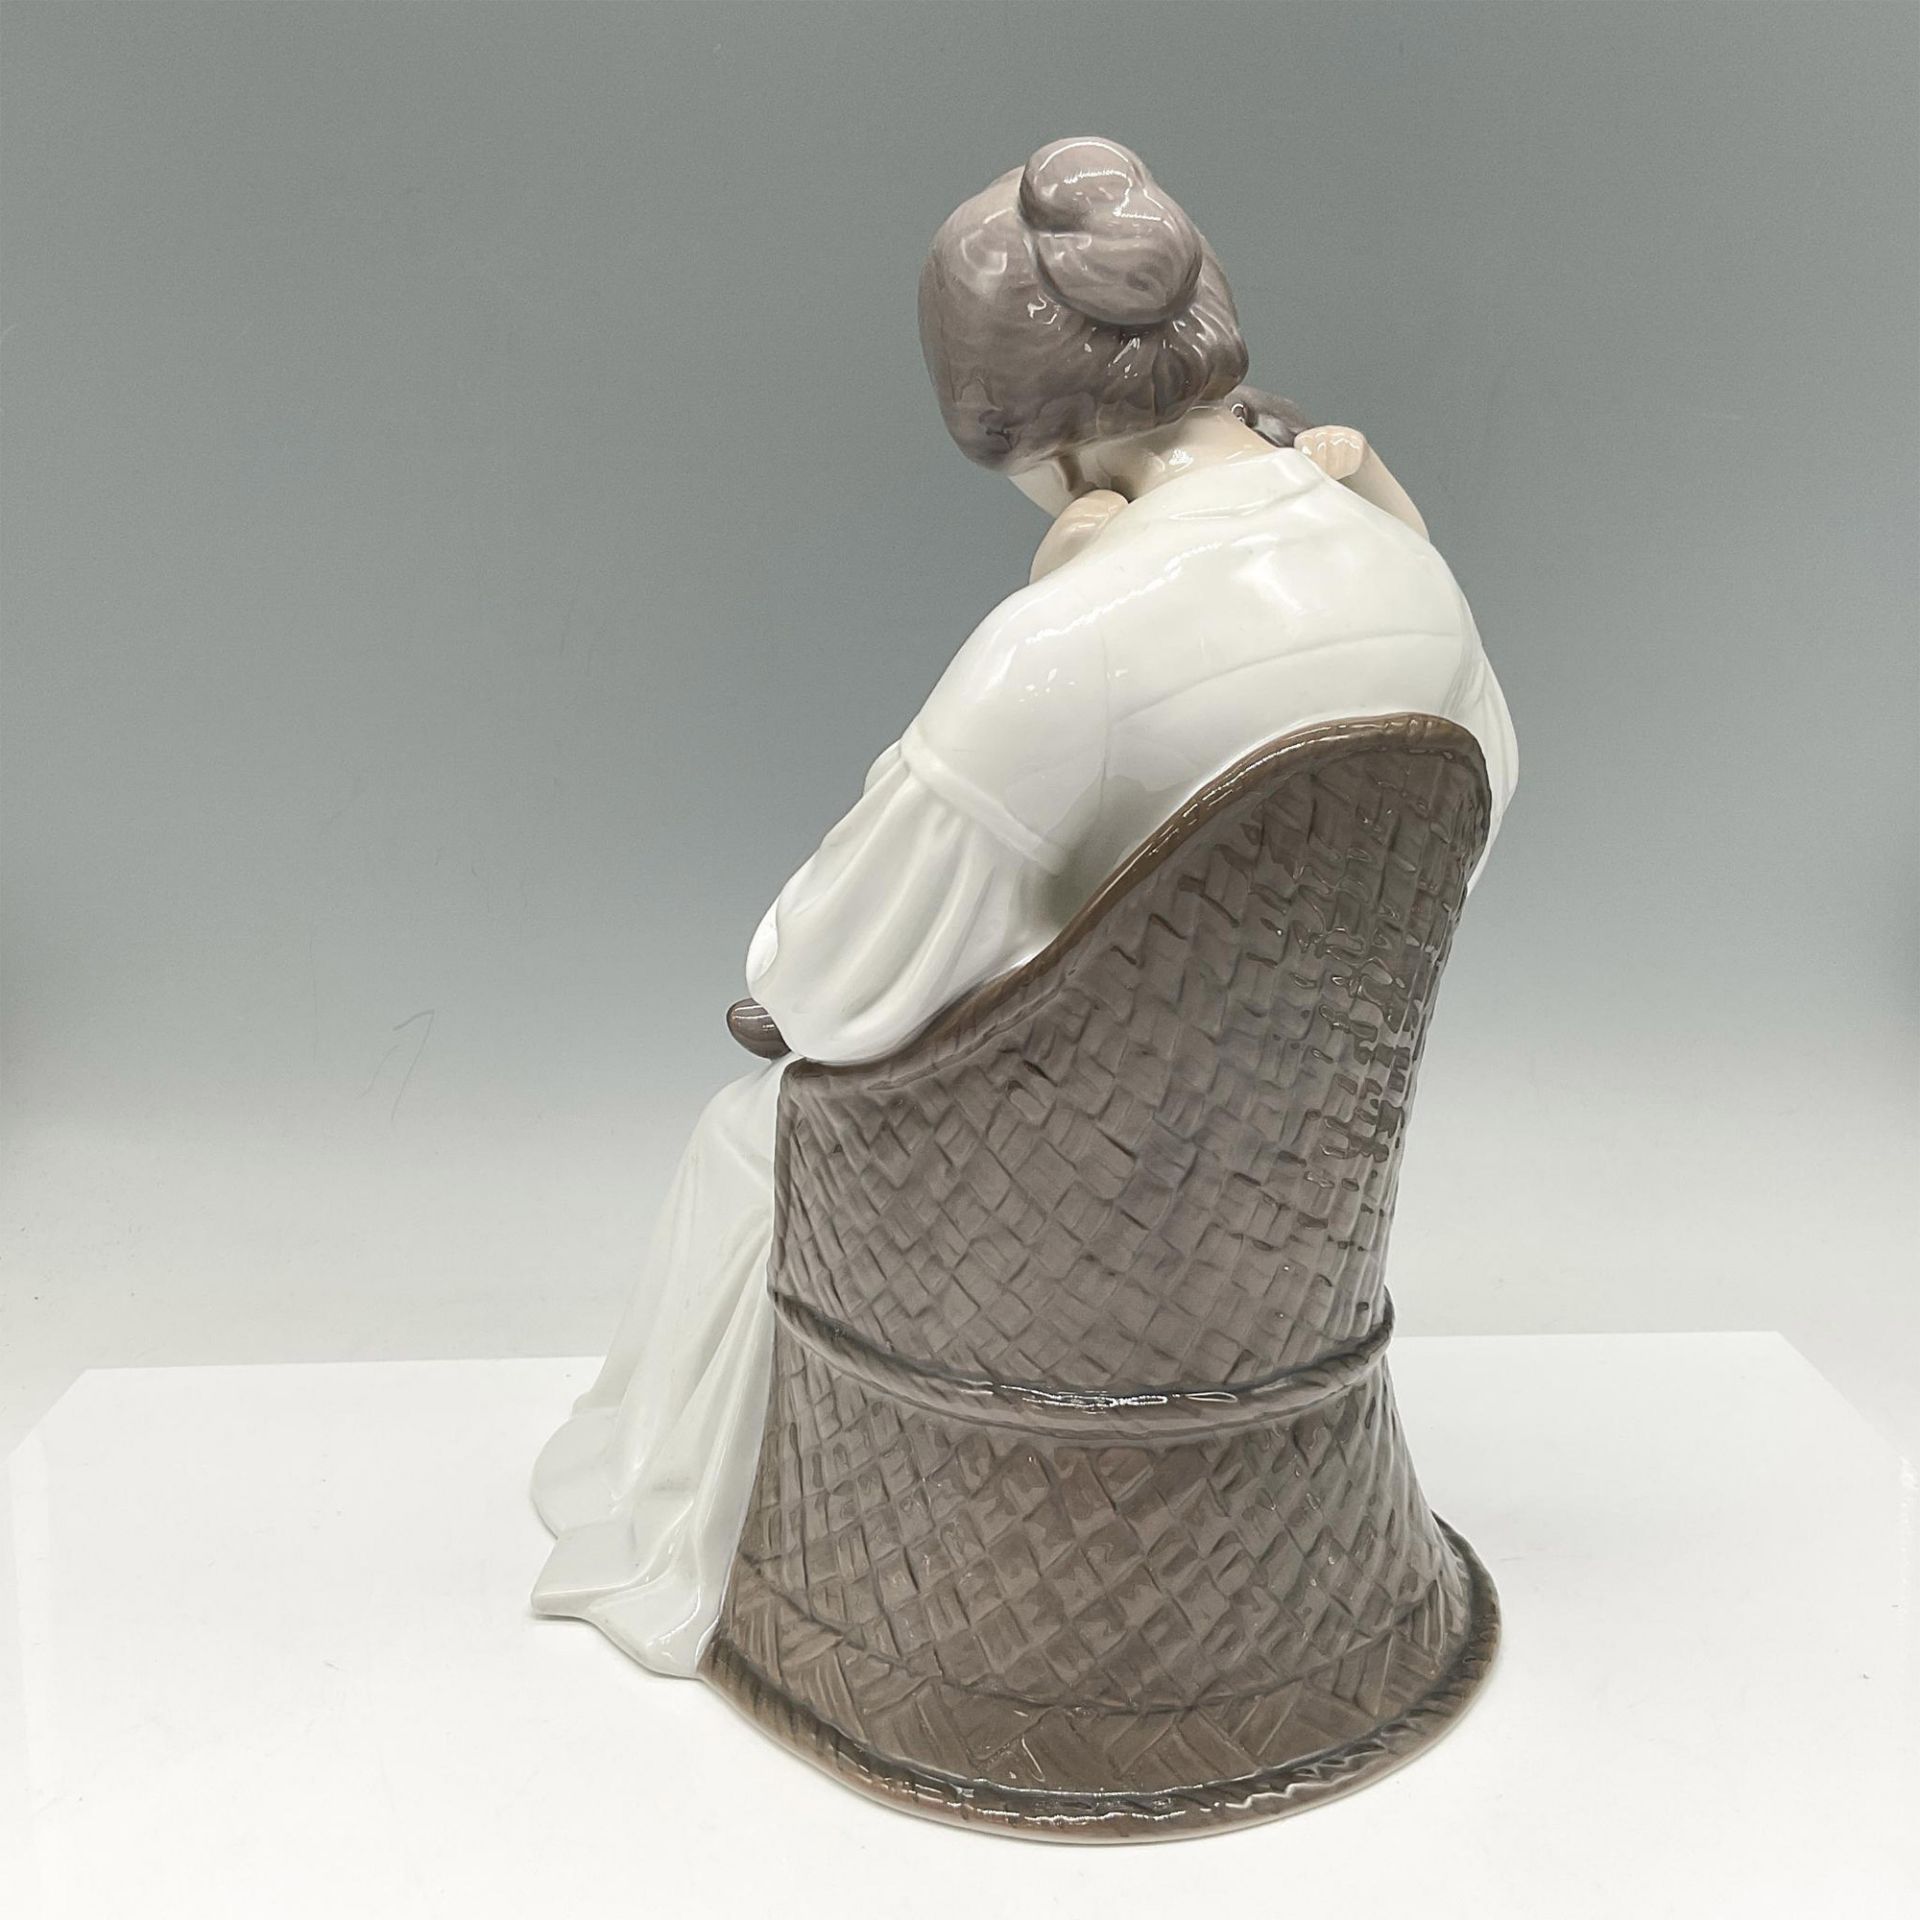 Bing & Grondahl Porcelain Figurine, Mother and Child - Image 2 of 3